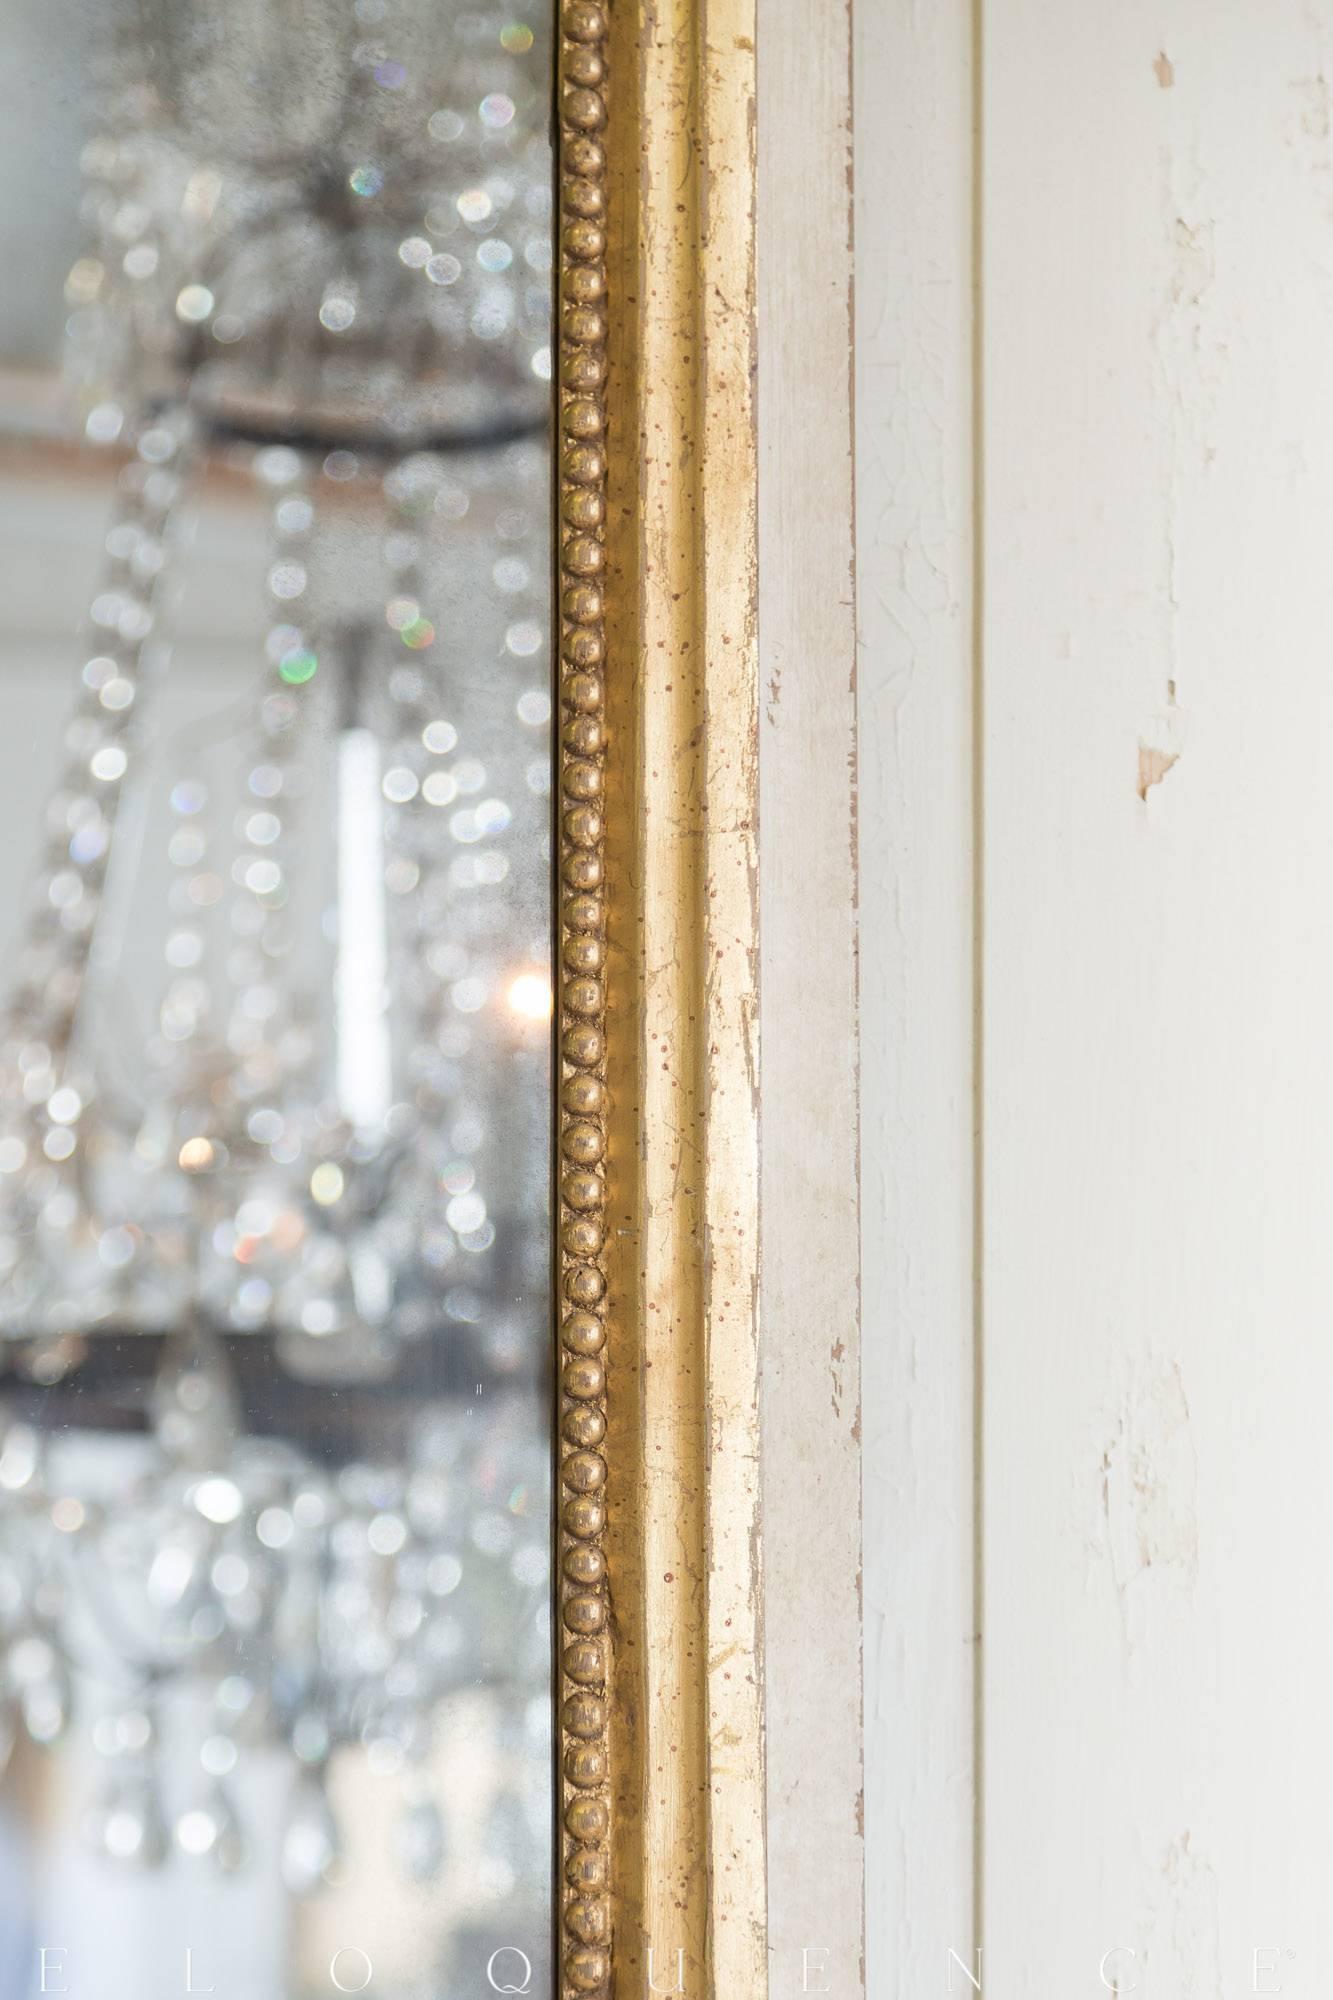 Eloquence® Grande Eugenie Panel Mirror in Toasted Almond and Gold In Excellent Condition For Sale In Los Angeles, CA